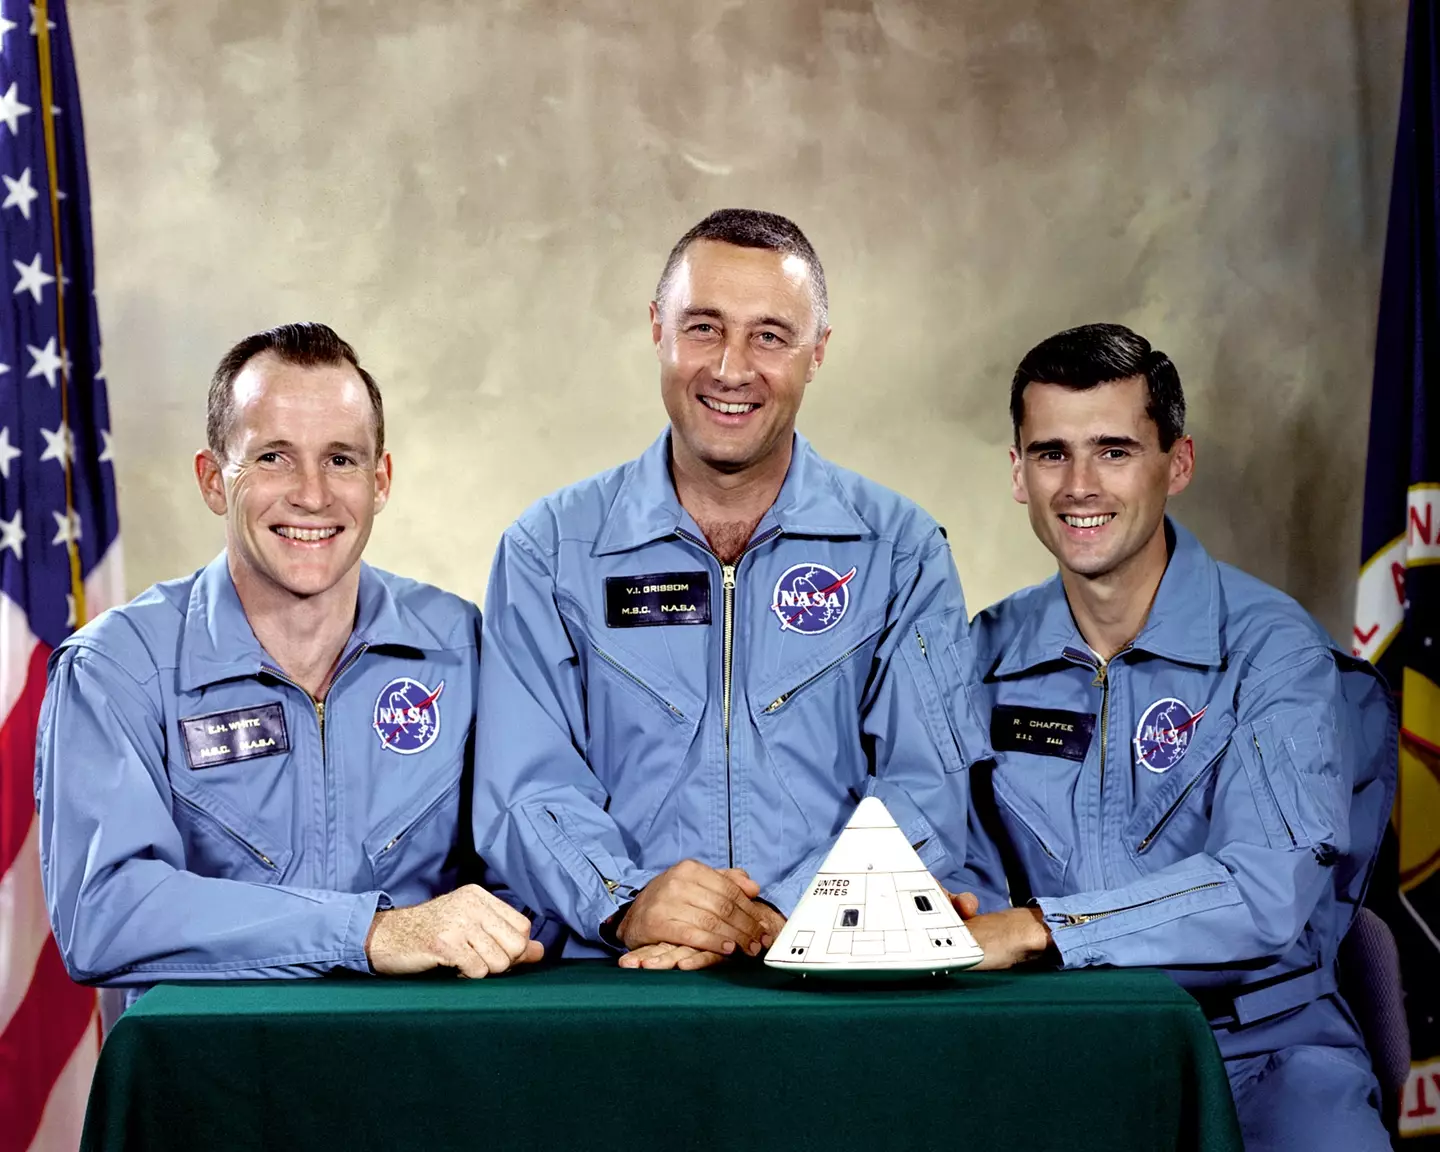 The astronauts who sadly lost their lives in the fire.